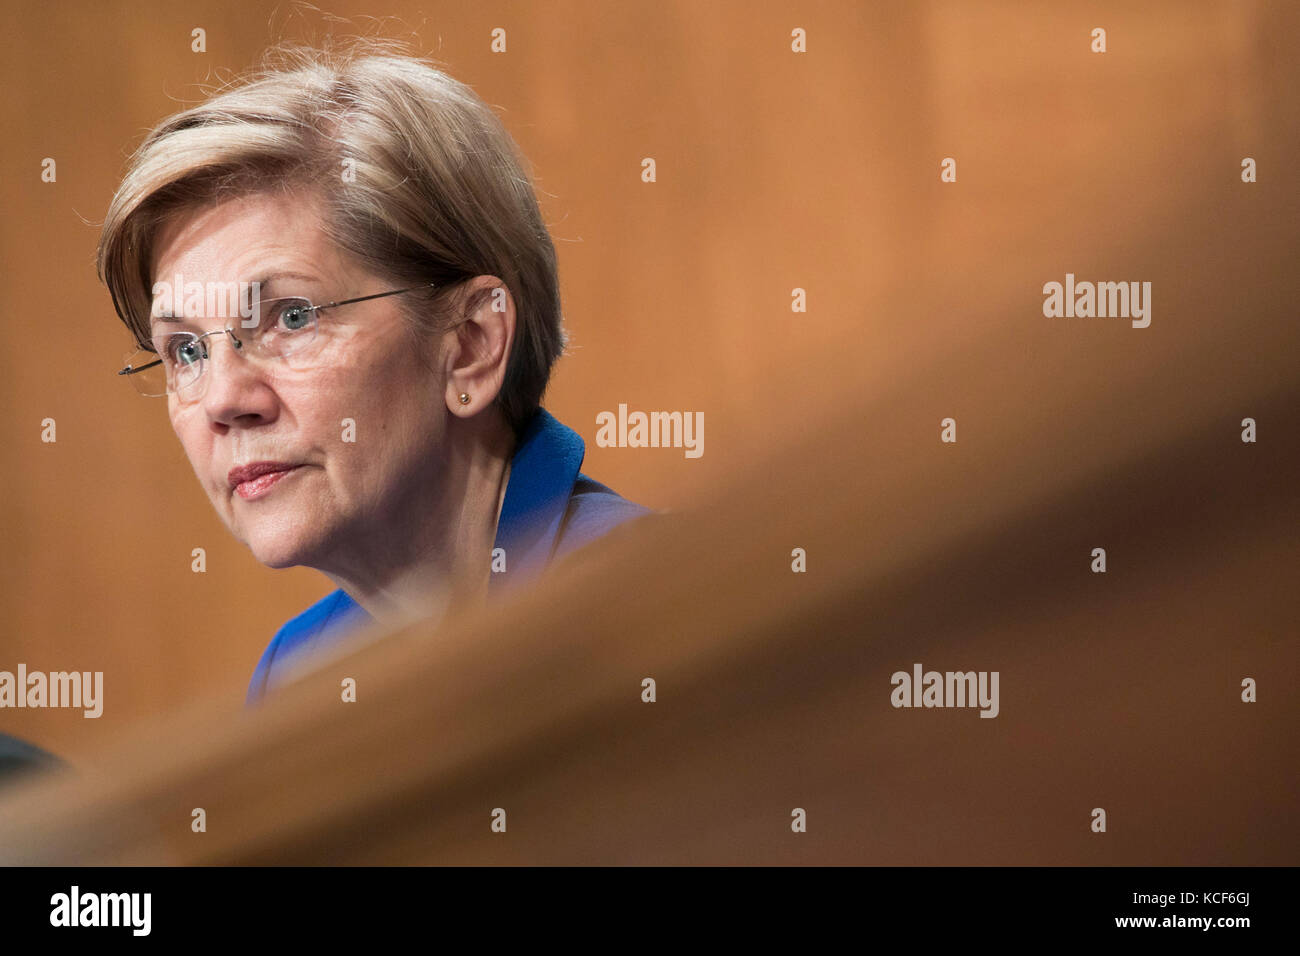 Washington DC, USA. 04th Oct, 2017. Sen. Elizabeth Warren (D-MA) questions a witness during a Senate Banking, Housing and Urban Affairs Committee hearing entitled, “An Examination of the Equifax Cybersecurity Breach,” in Washington, D.C., on October 4, 2017. The data breach is believed to have compromised the social security numbers of over 140 million Americans. Credit: Kristoffer Tripplaar/Alamy Live News Stock Photo